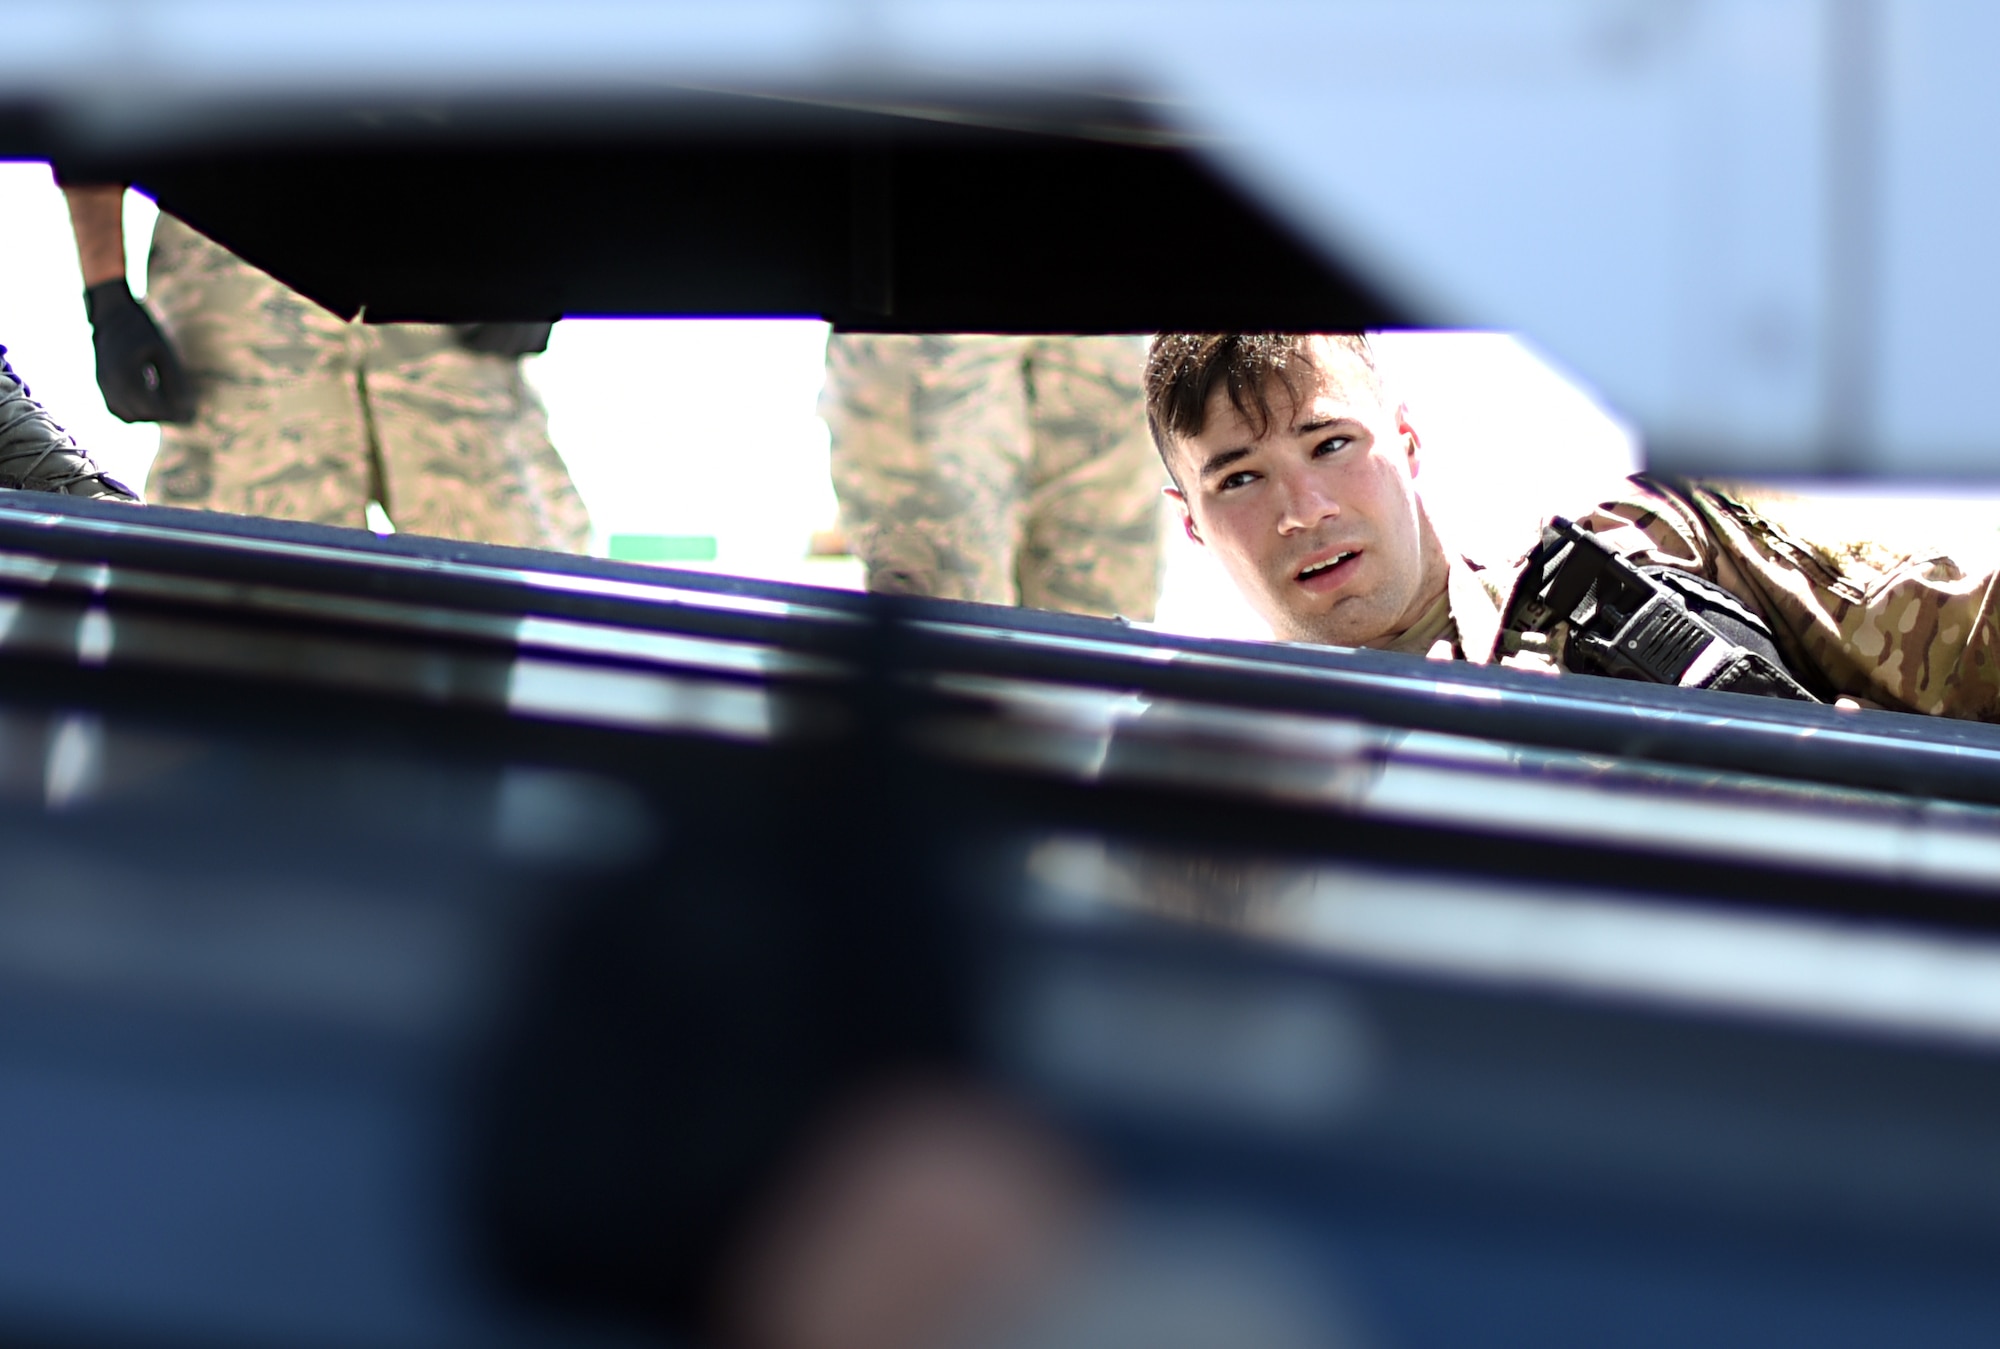 U.S. Air Force Airman 1st Class Anthony Sauma, 60th Aerial Port Squadron air transportation journeyman, ensures the proper load-up of a simulated ambulance onto a C-17 Globemaster III aircraft Aug. 1, 2019, at Travis Air Force Base, California. The exercise utilized the expertise of both 60th APS and 729th APS Airmen to augment Travis mobility operations. (U.S. Air Force photo by Senior Airman Christian Conrad)